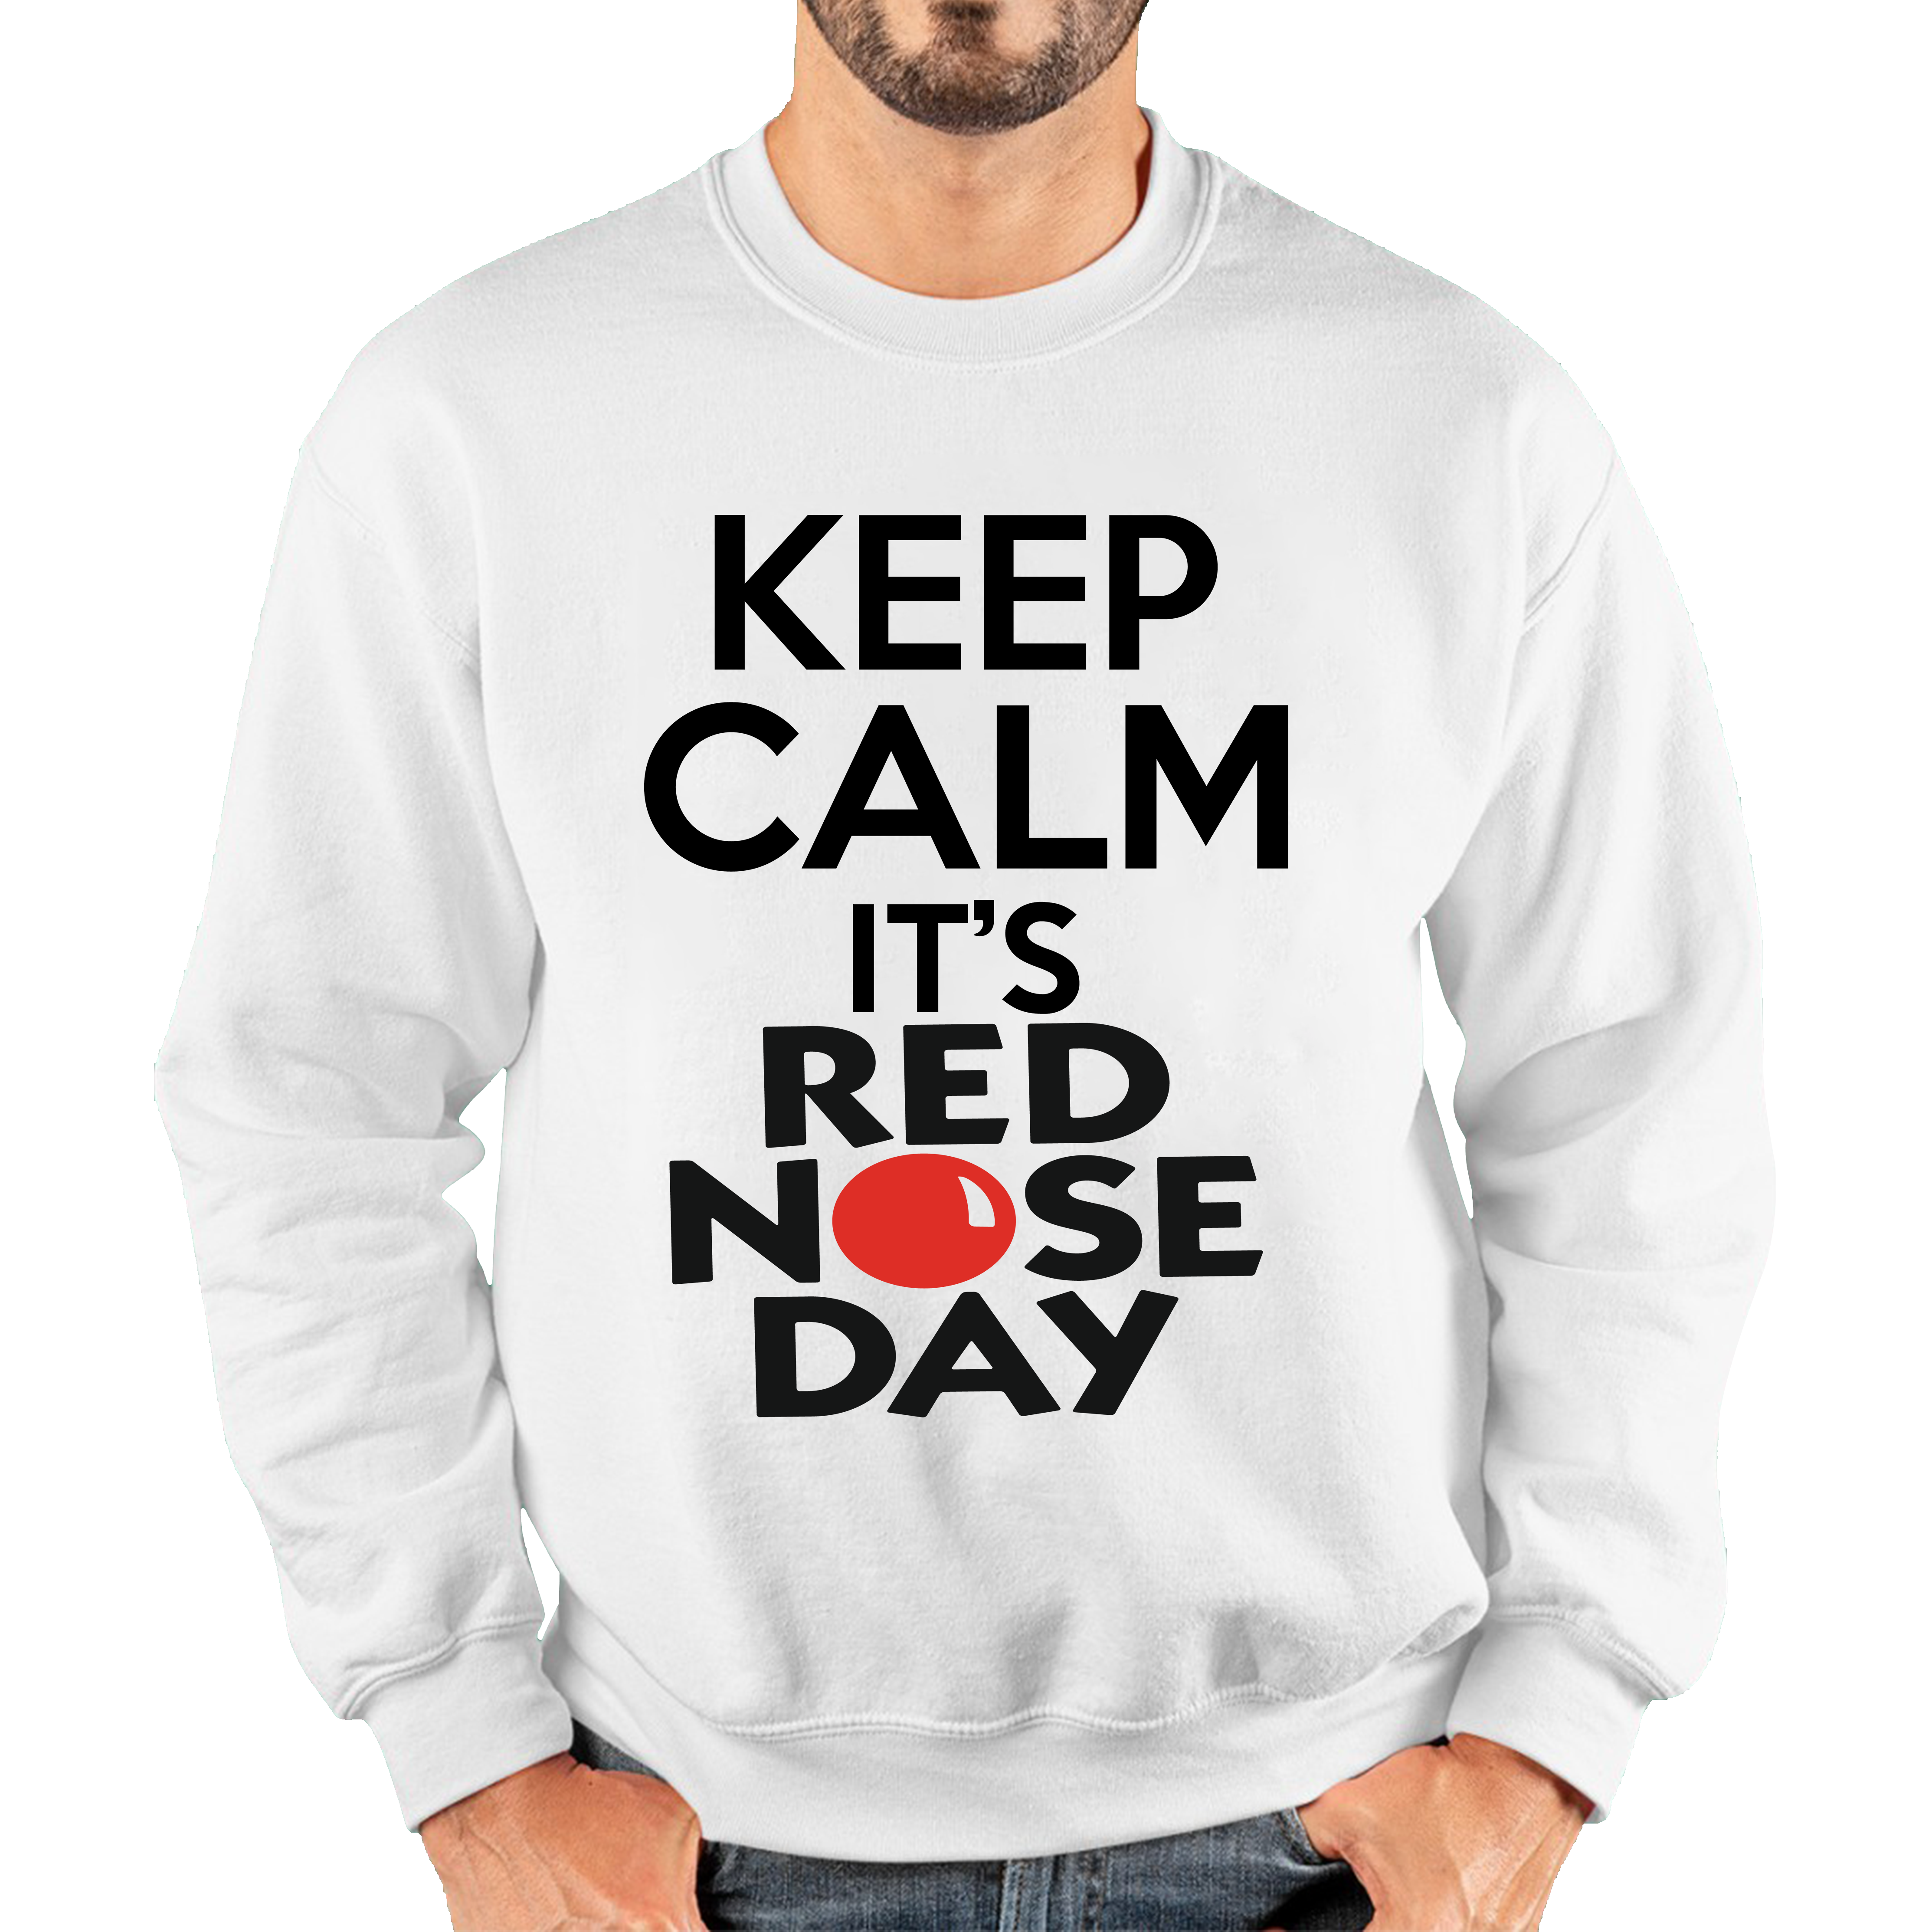 Keep Calm It's Red Nose Day Adult Sweatshirt. 50% Goes To Charity